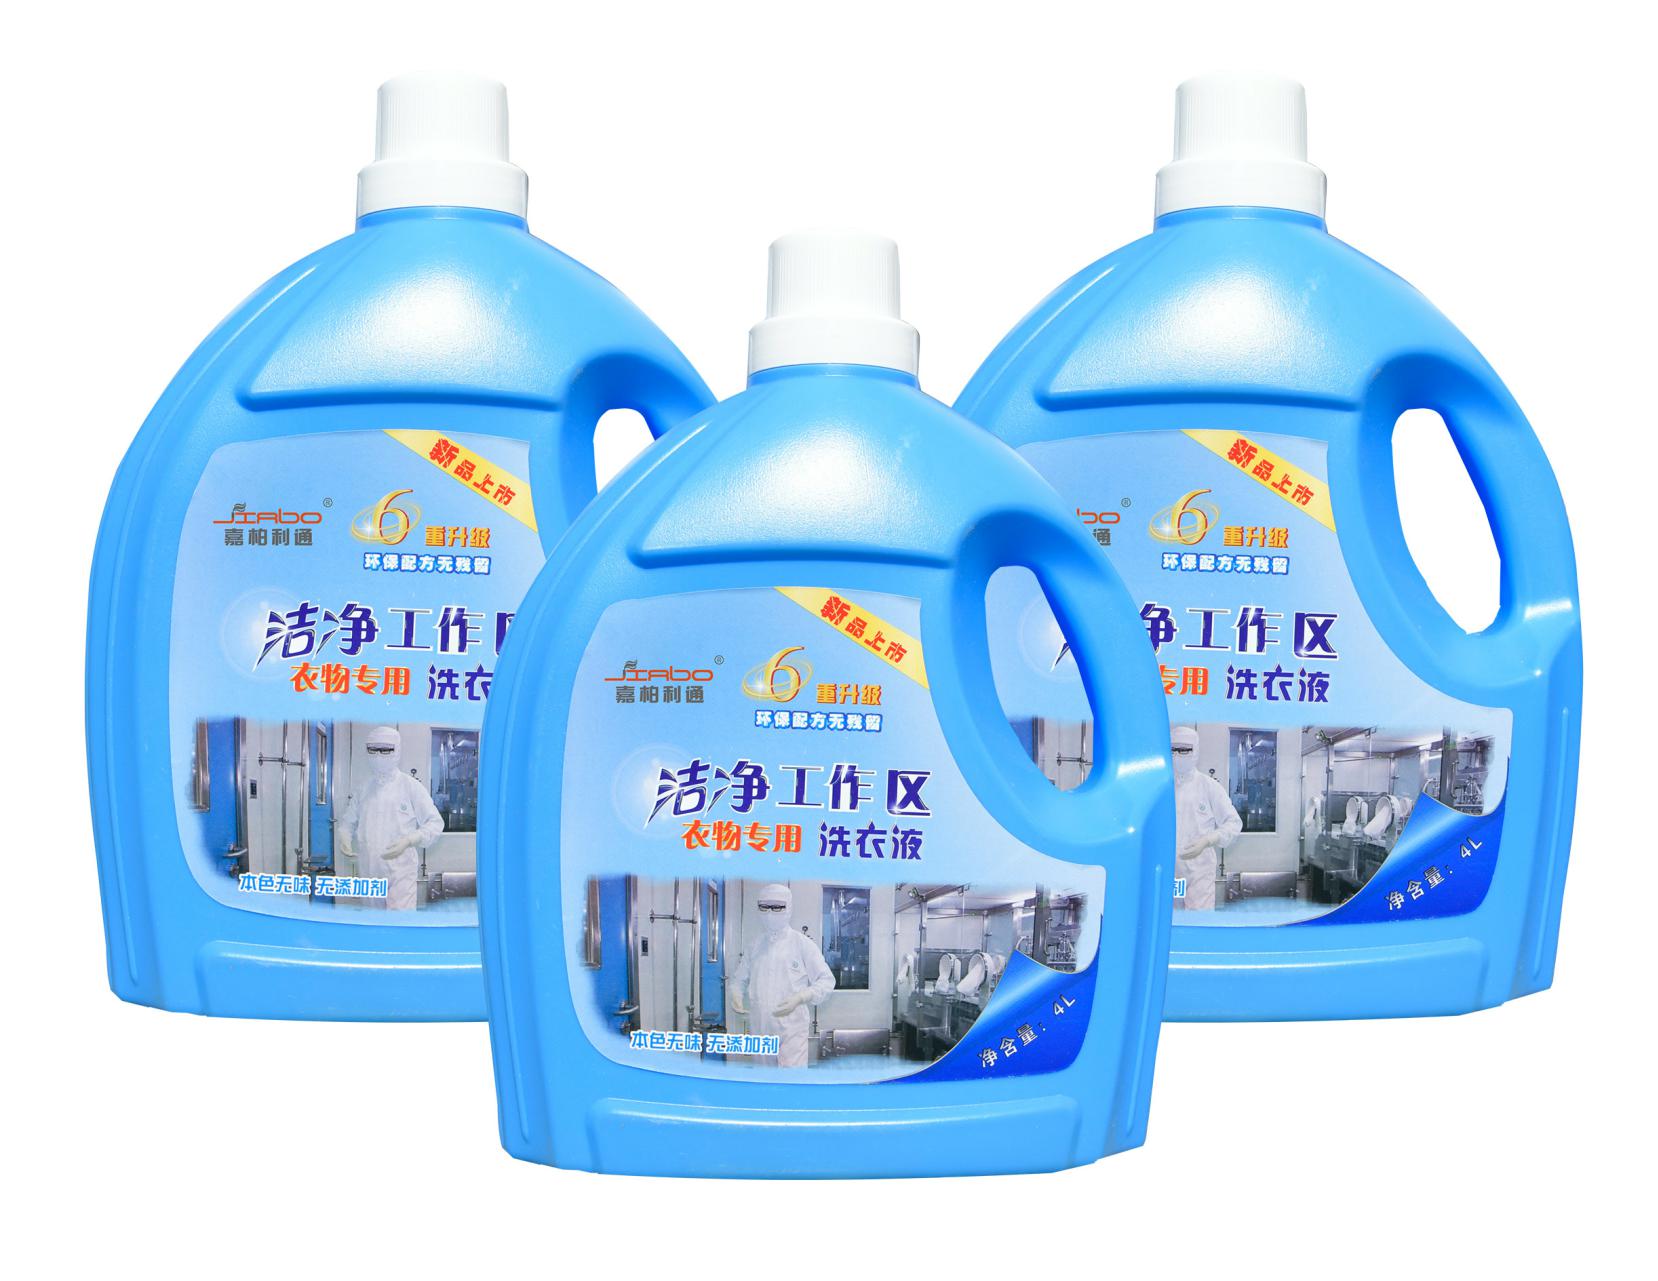 Detergent for clothes in clean work area